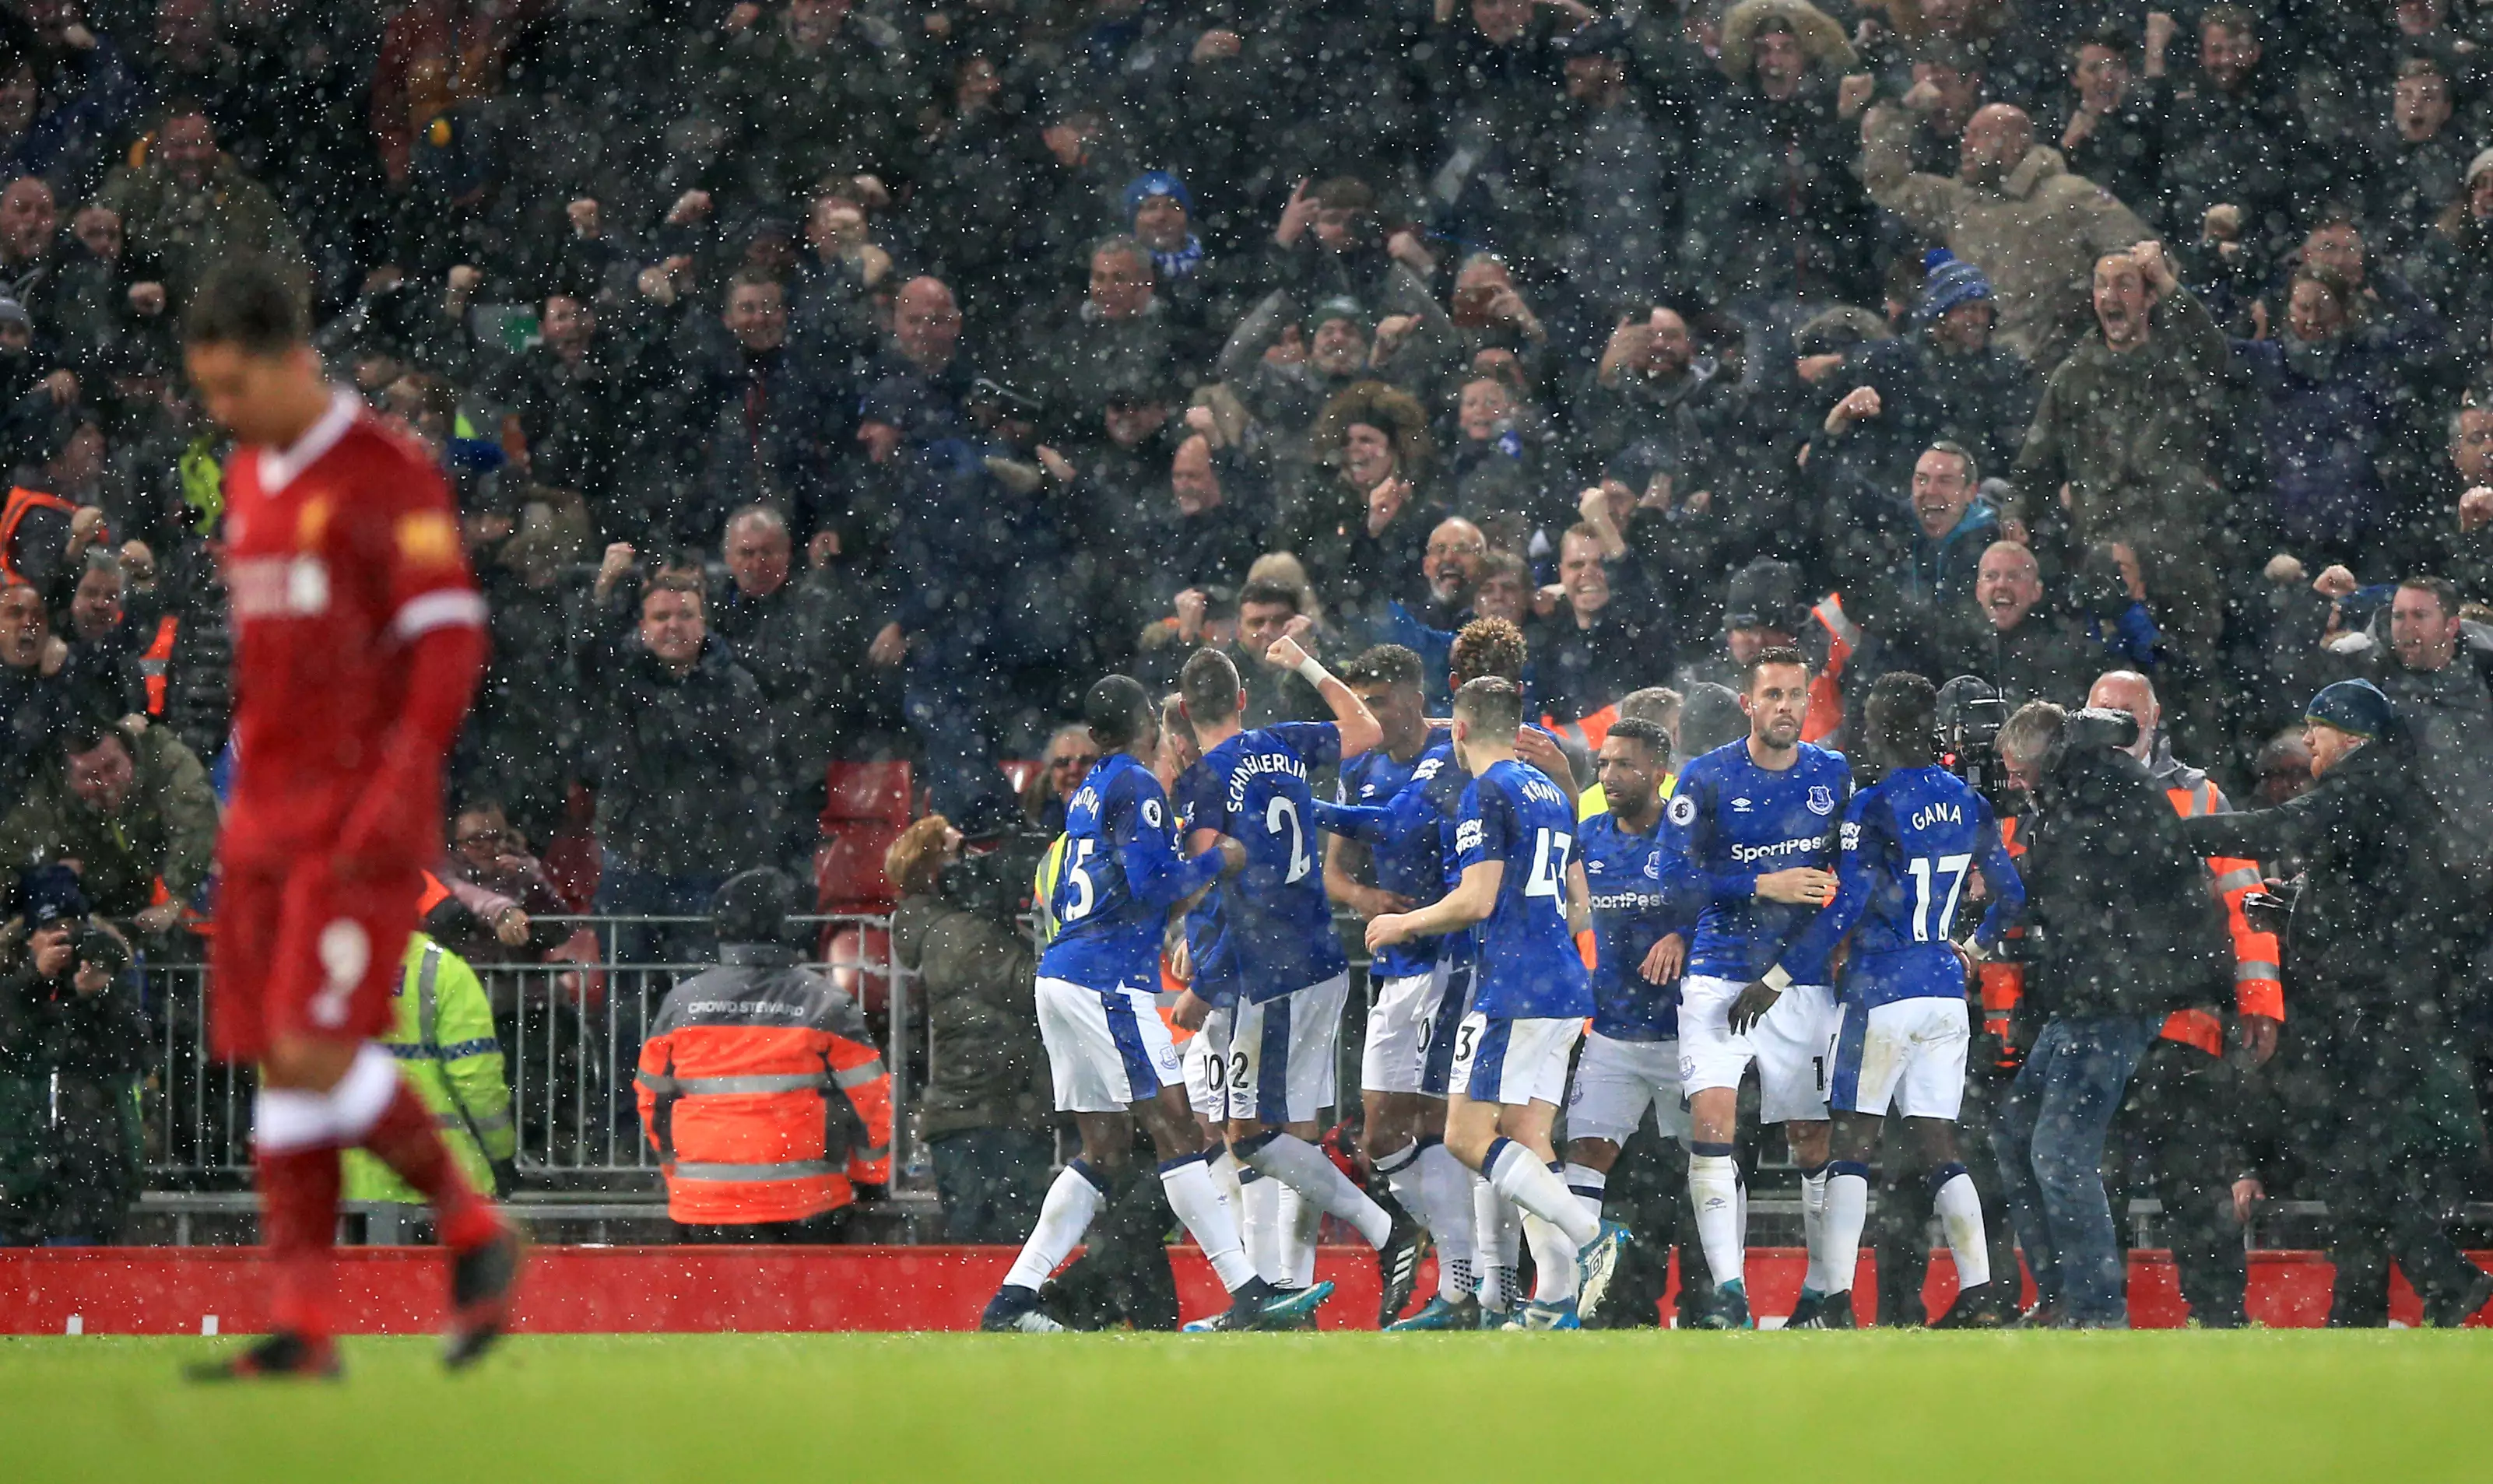 Rooney celebrates with his teammates after converting a penalty against Liverpool. Image: PA